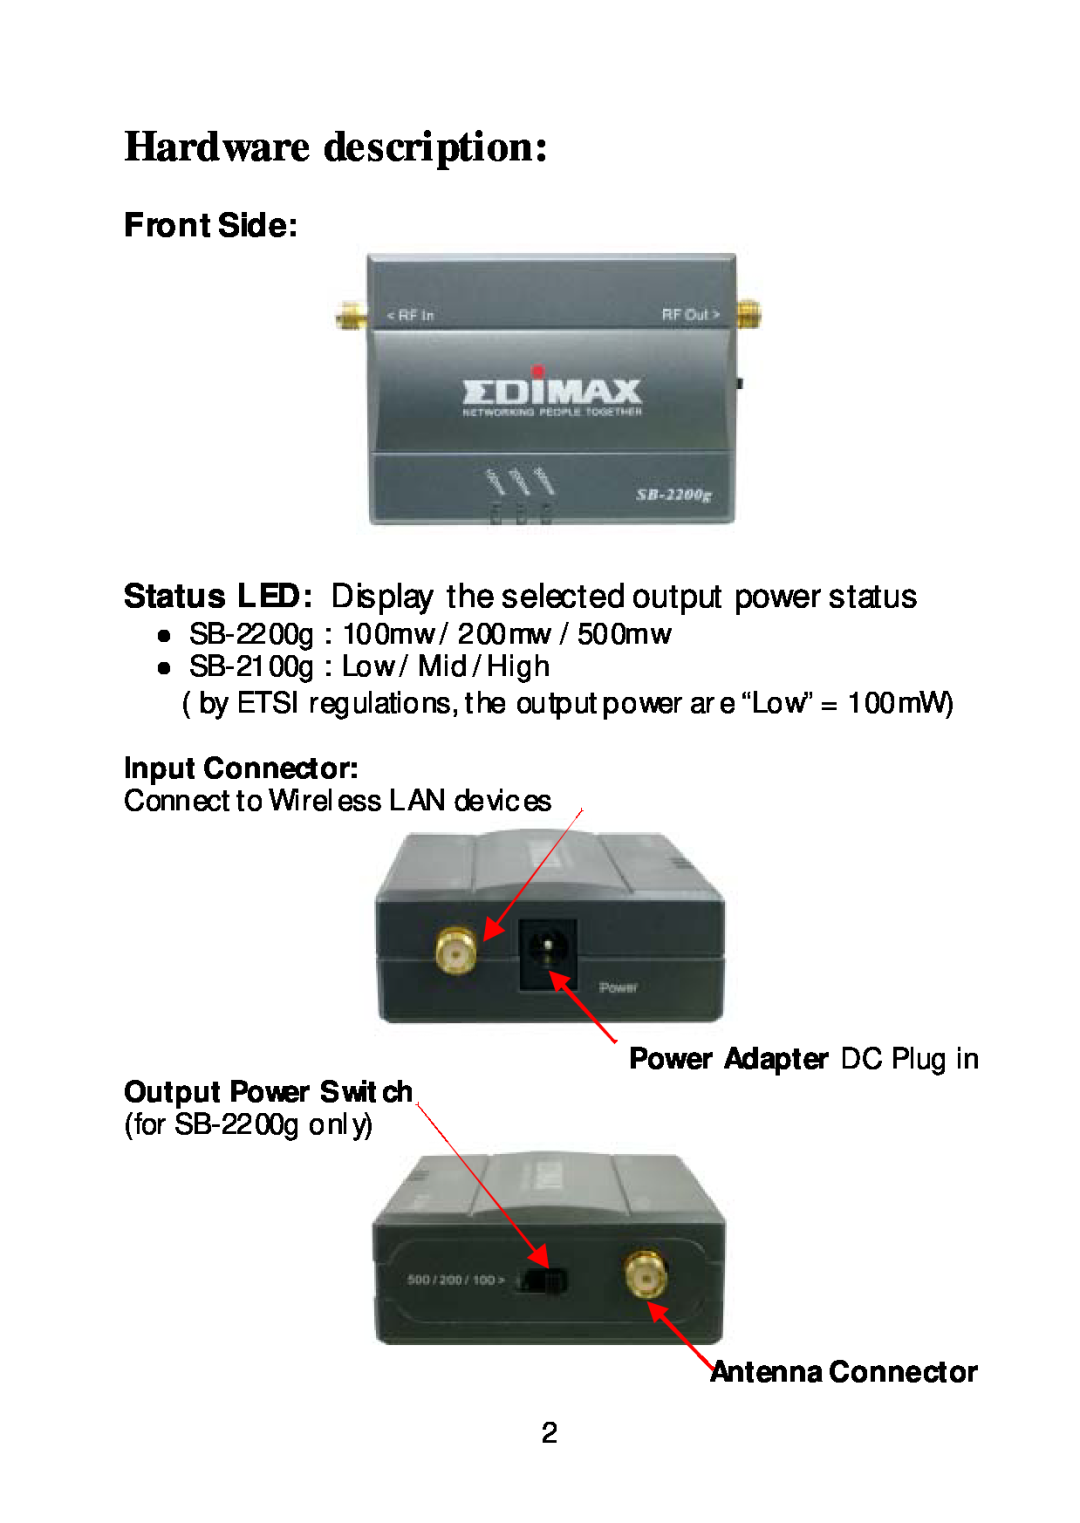 Edimax Technology Network Router user manual Hardware description, Front Side, Input Connector, Antenna Connector 